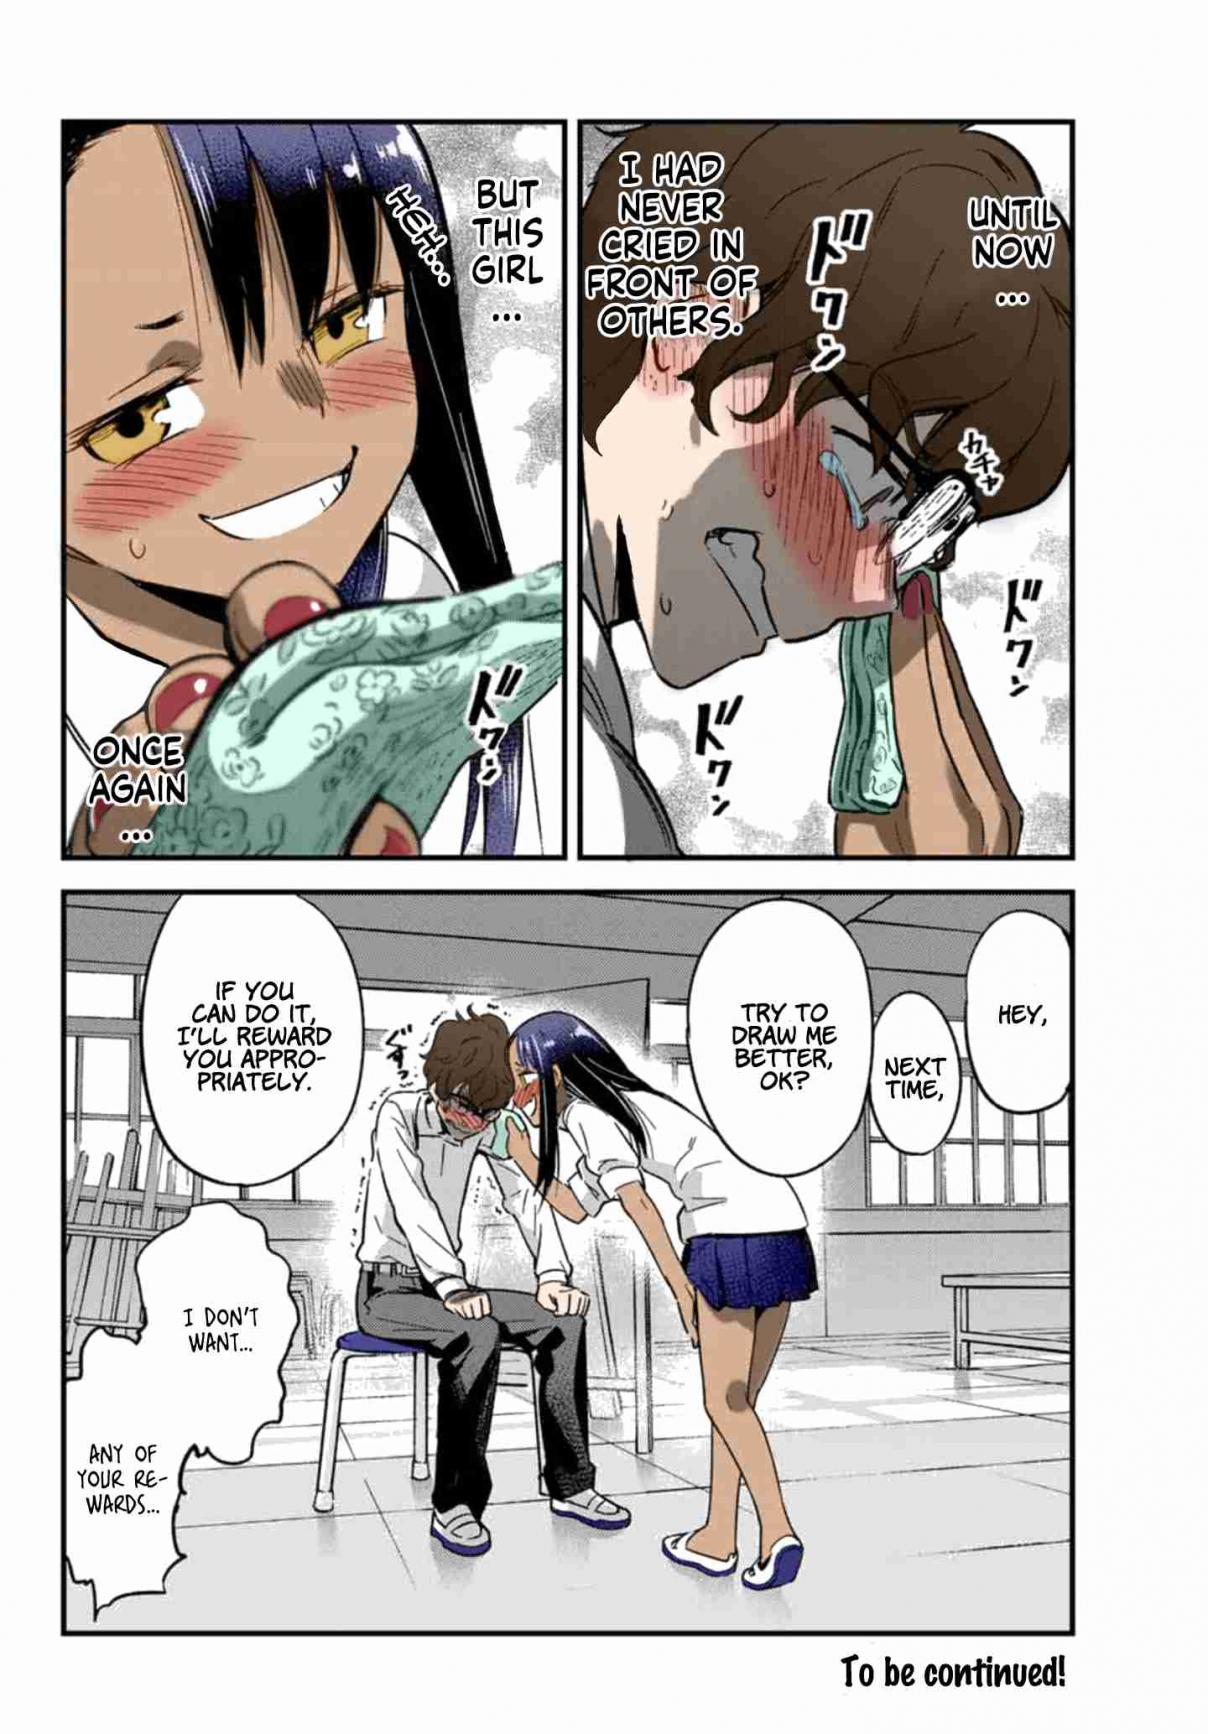 Ijiranaide, Nagatoro san (Fan Colored) Vol. 1 Ch. 2 "Watching you is so fun!" (Unfinished ver.)